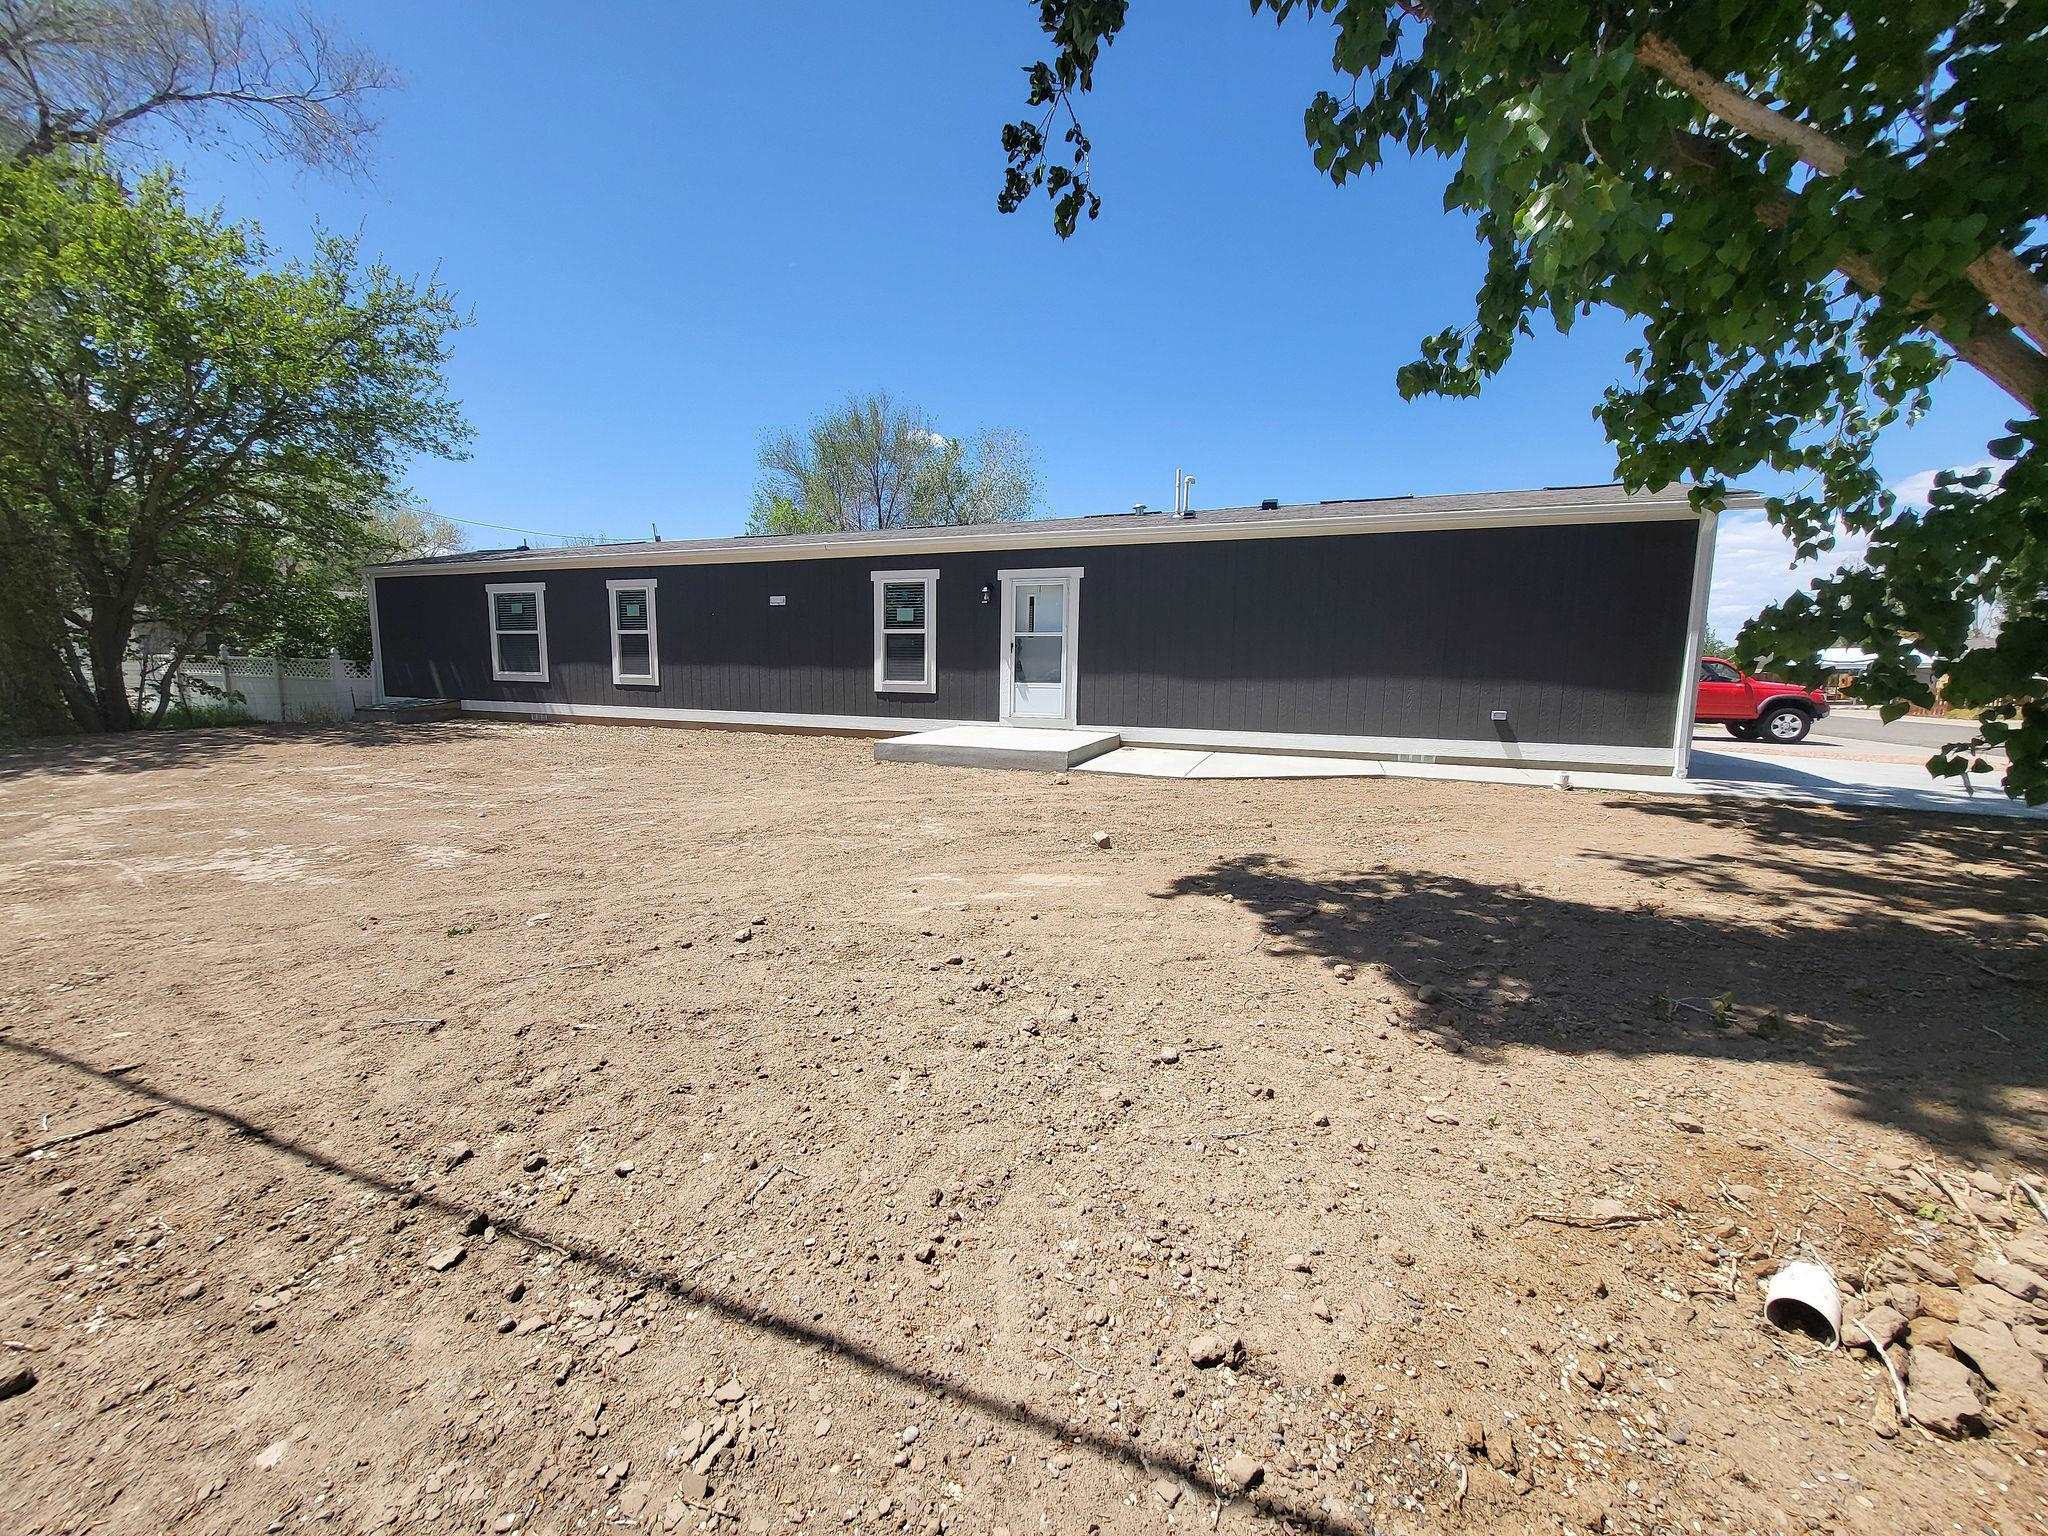 Affordable brand new 3-bedroom, 2-bathroom home in Fruita ON A CORNER LOT. This new home comes with staging furniture and is ready to go. Home is on a permanent foundation with a crawlspace. You don’t want to miss this one! Get in quick! All information is subject to error.